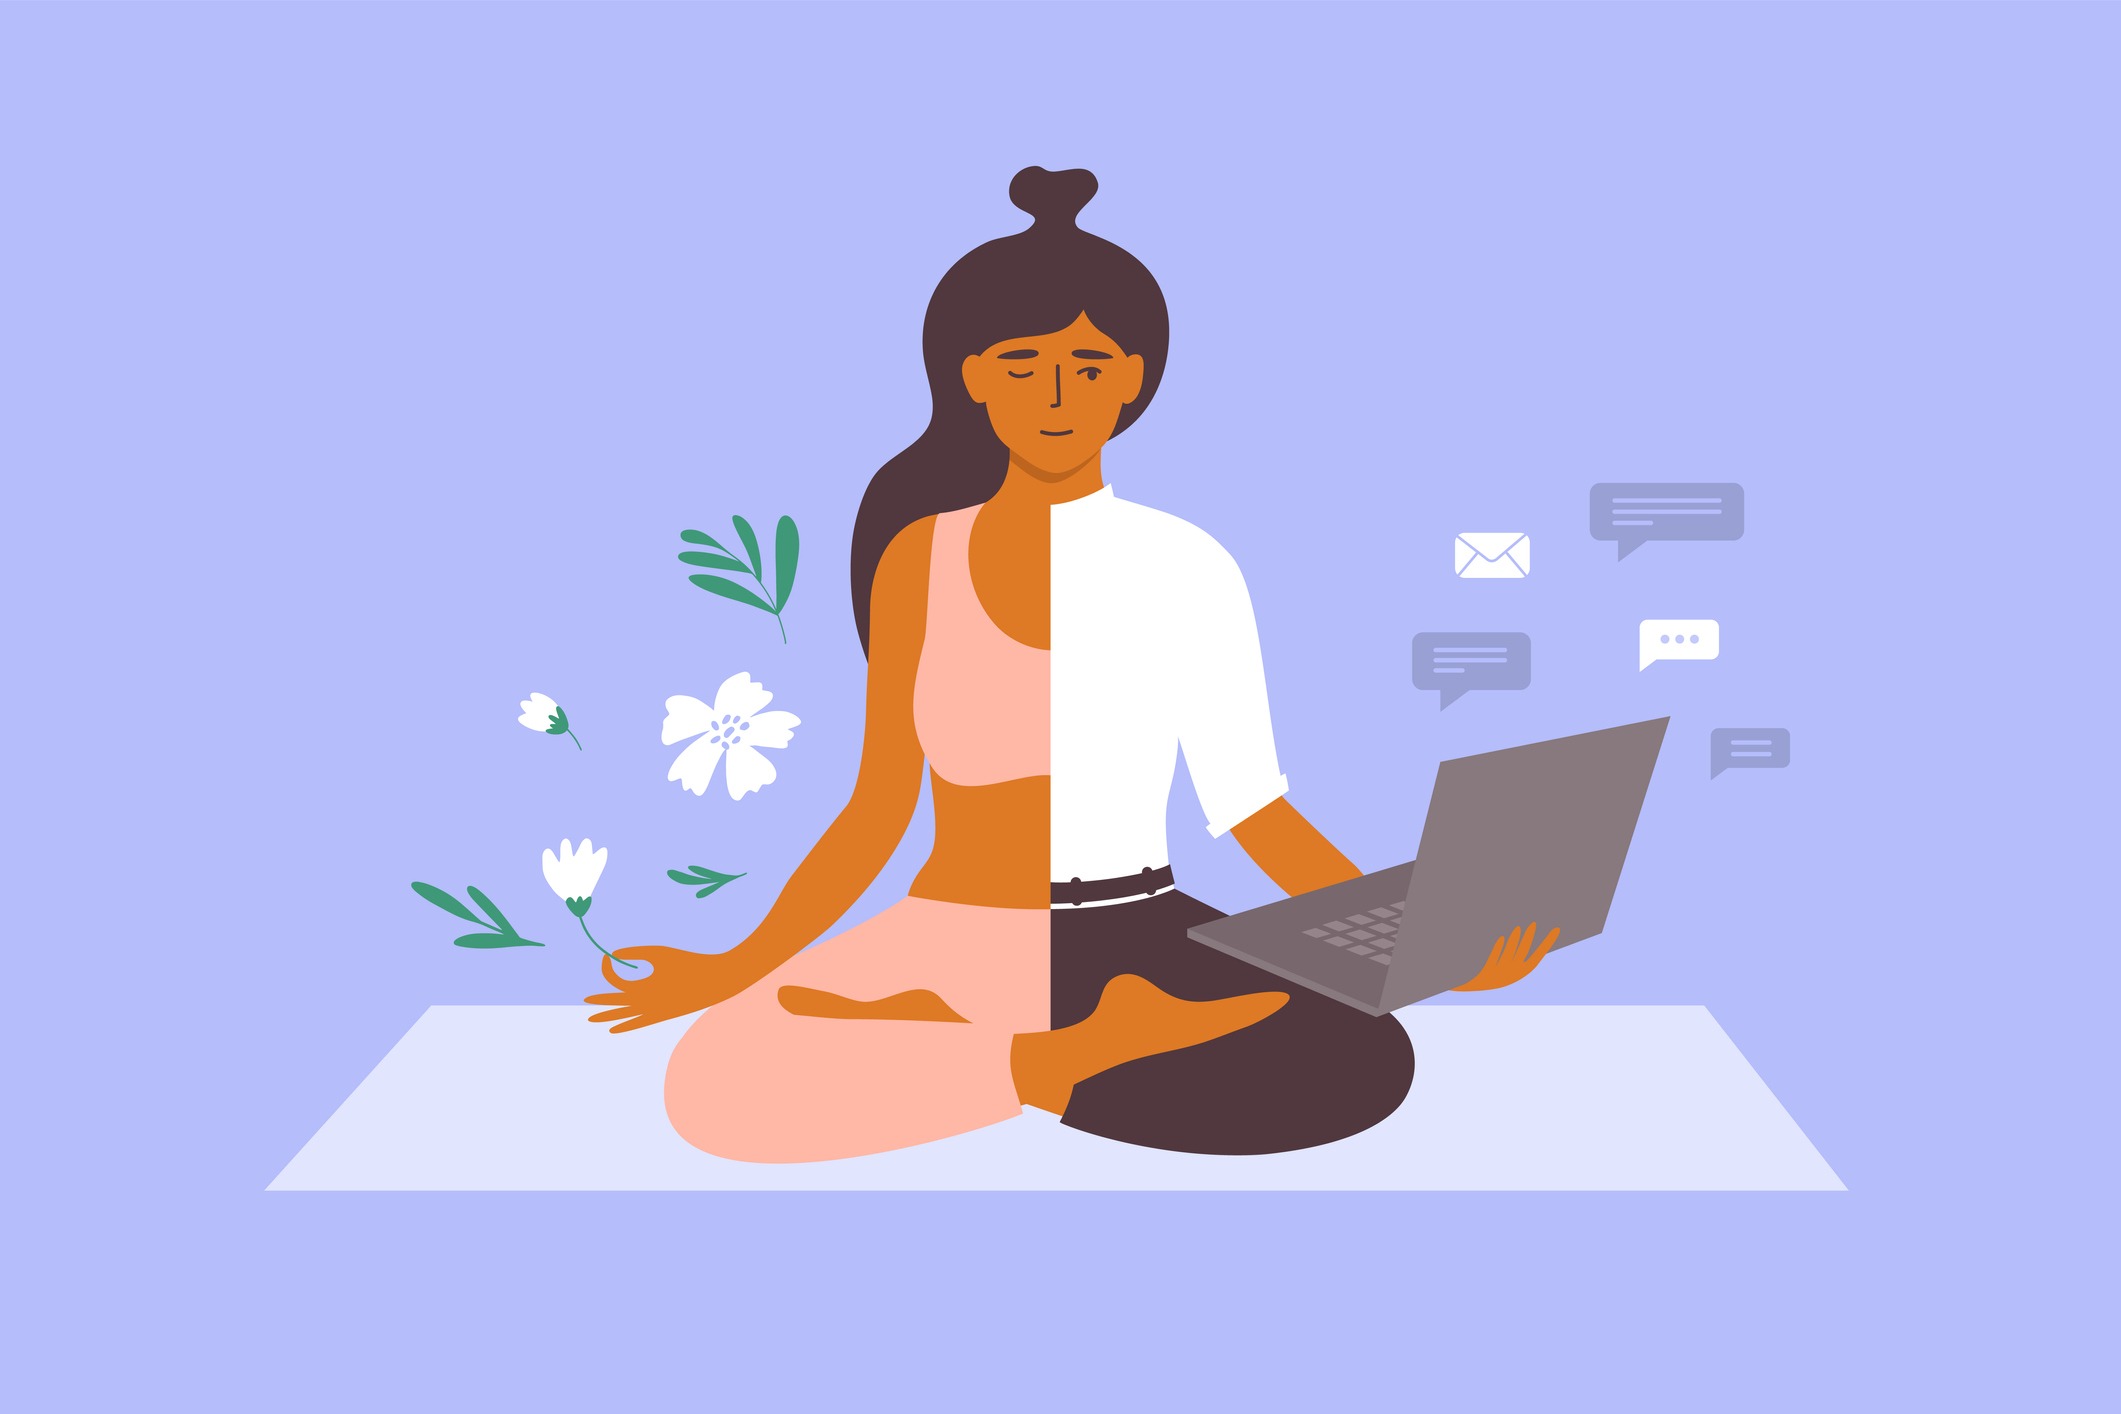 A vector image of a woman meditating and looking at her laptop.